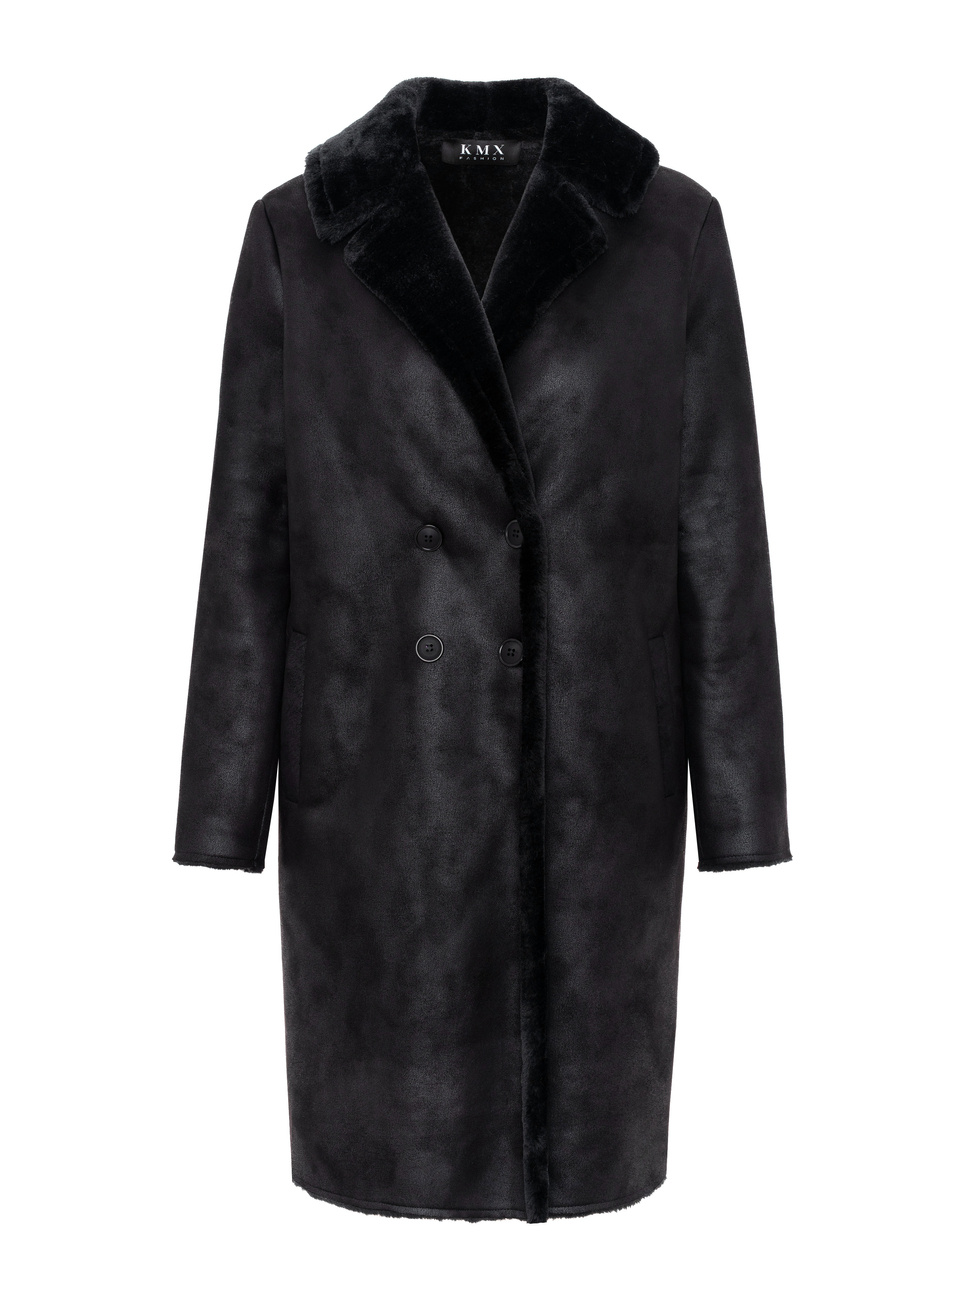 Two-tone double-breasted faux shearling coat